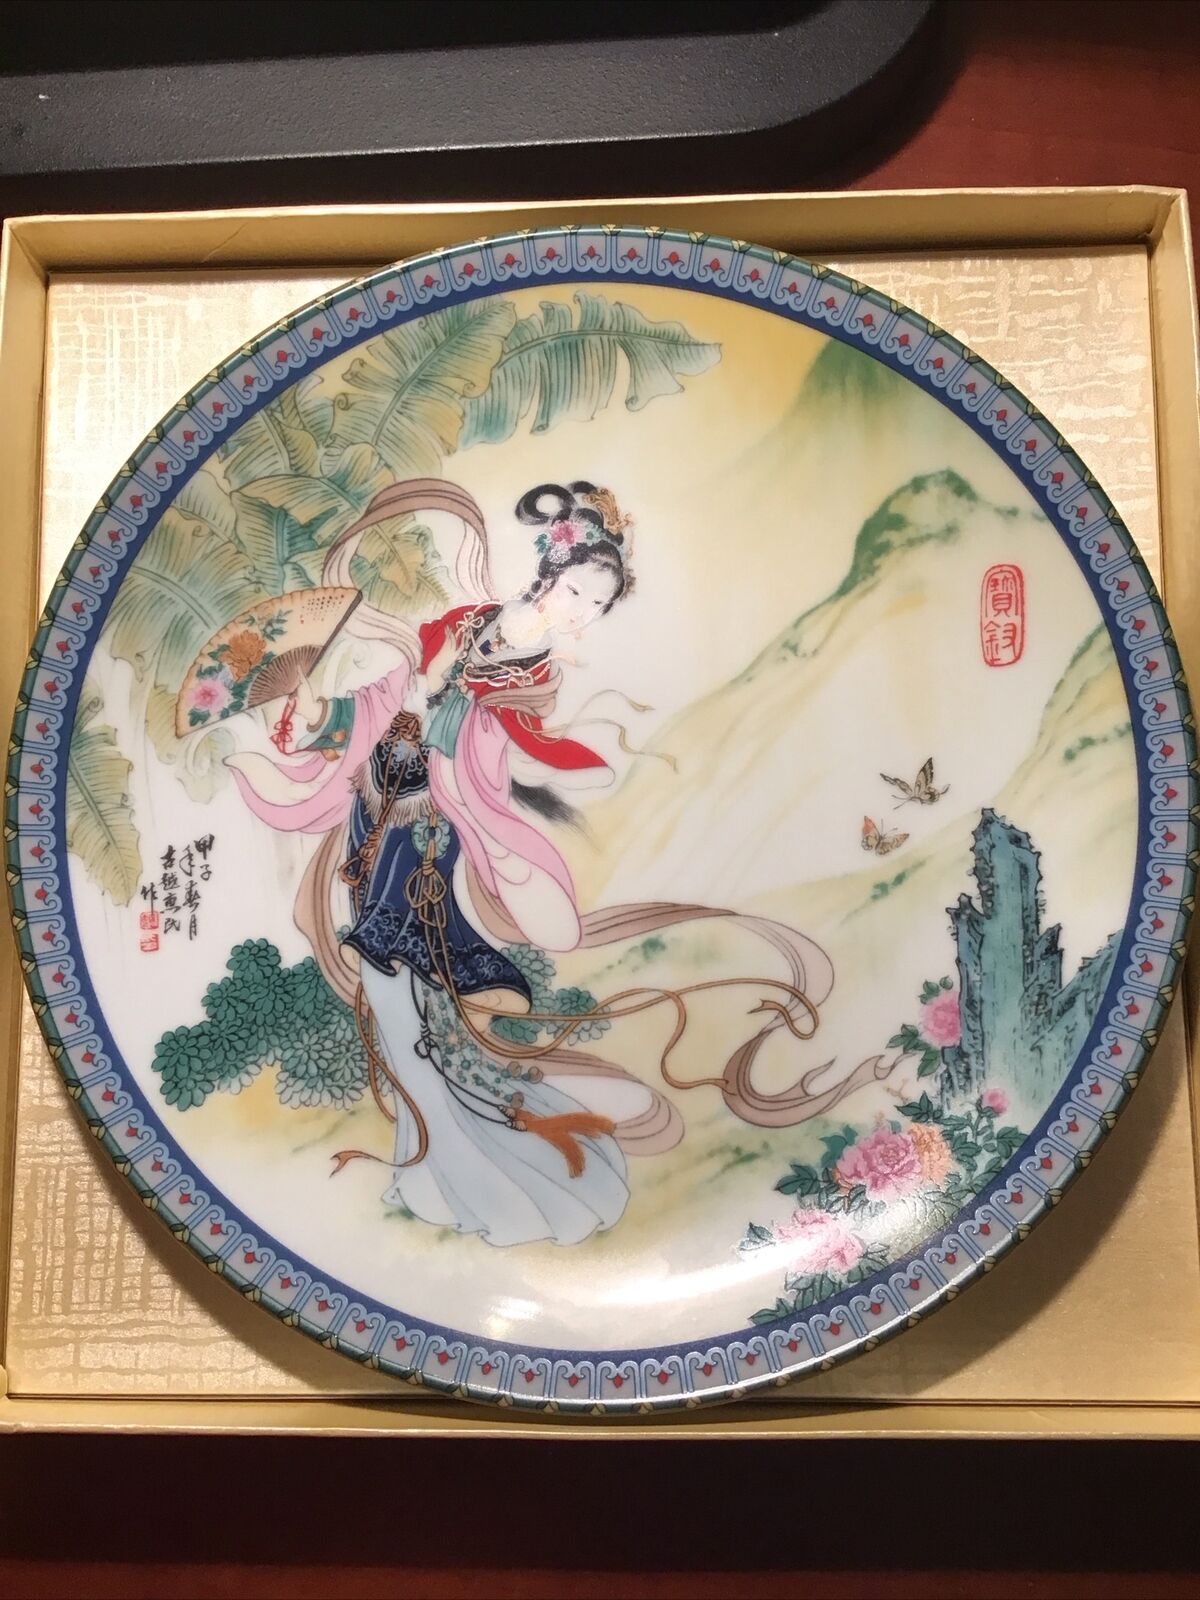 Zhao Huimin: Pao-Chai #1 of BEAUTIES OF RED MANSION Porcelain Plates Collection